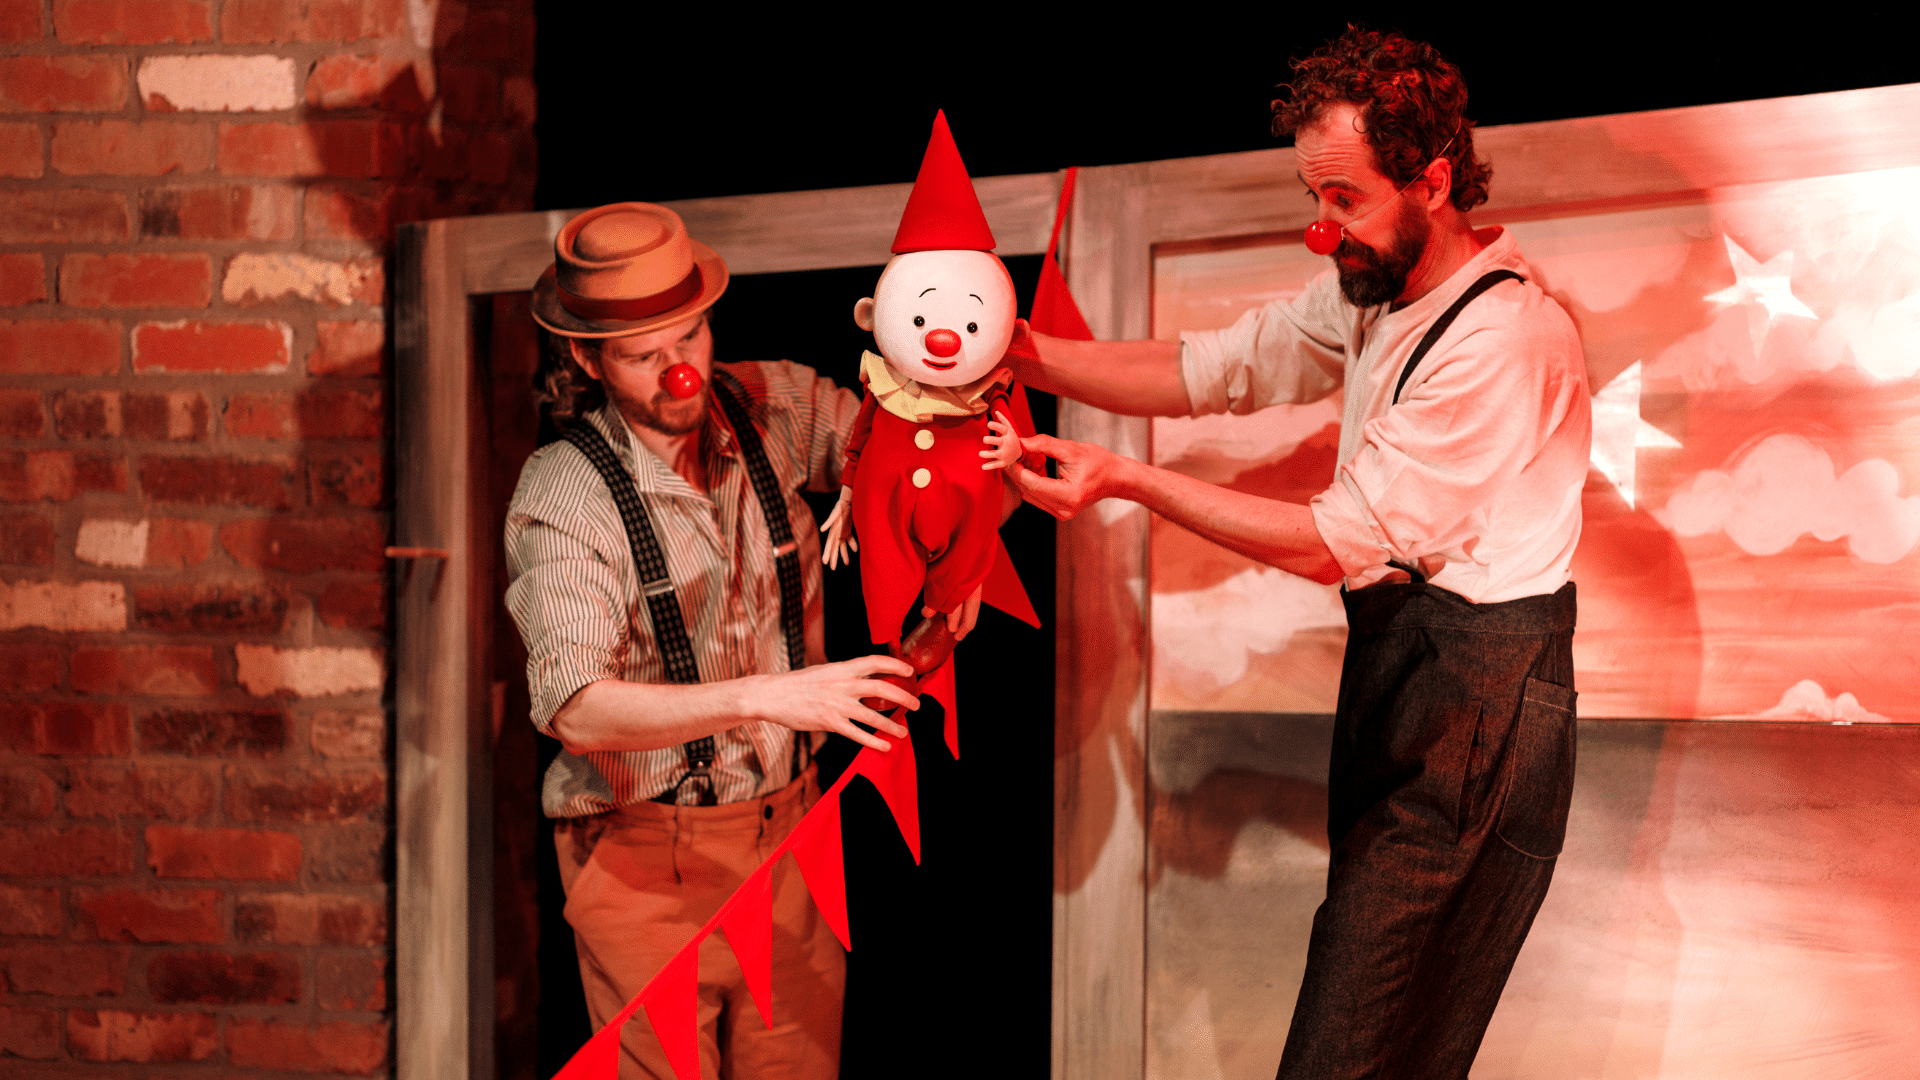 The Farmer & the Clown production photo. Two performers wearing shirts and red noses puppeteer a small clown dressed in red. The puppet appears to be tightrope walking along scarlet bunting.